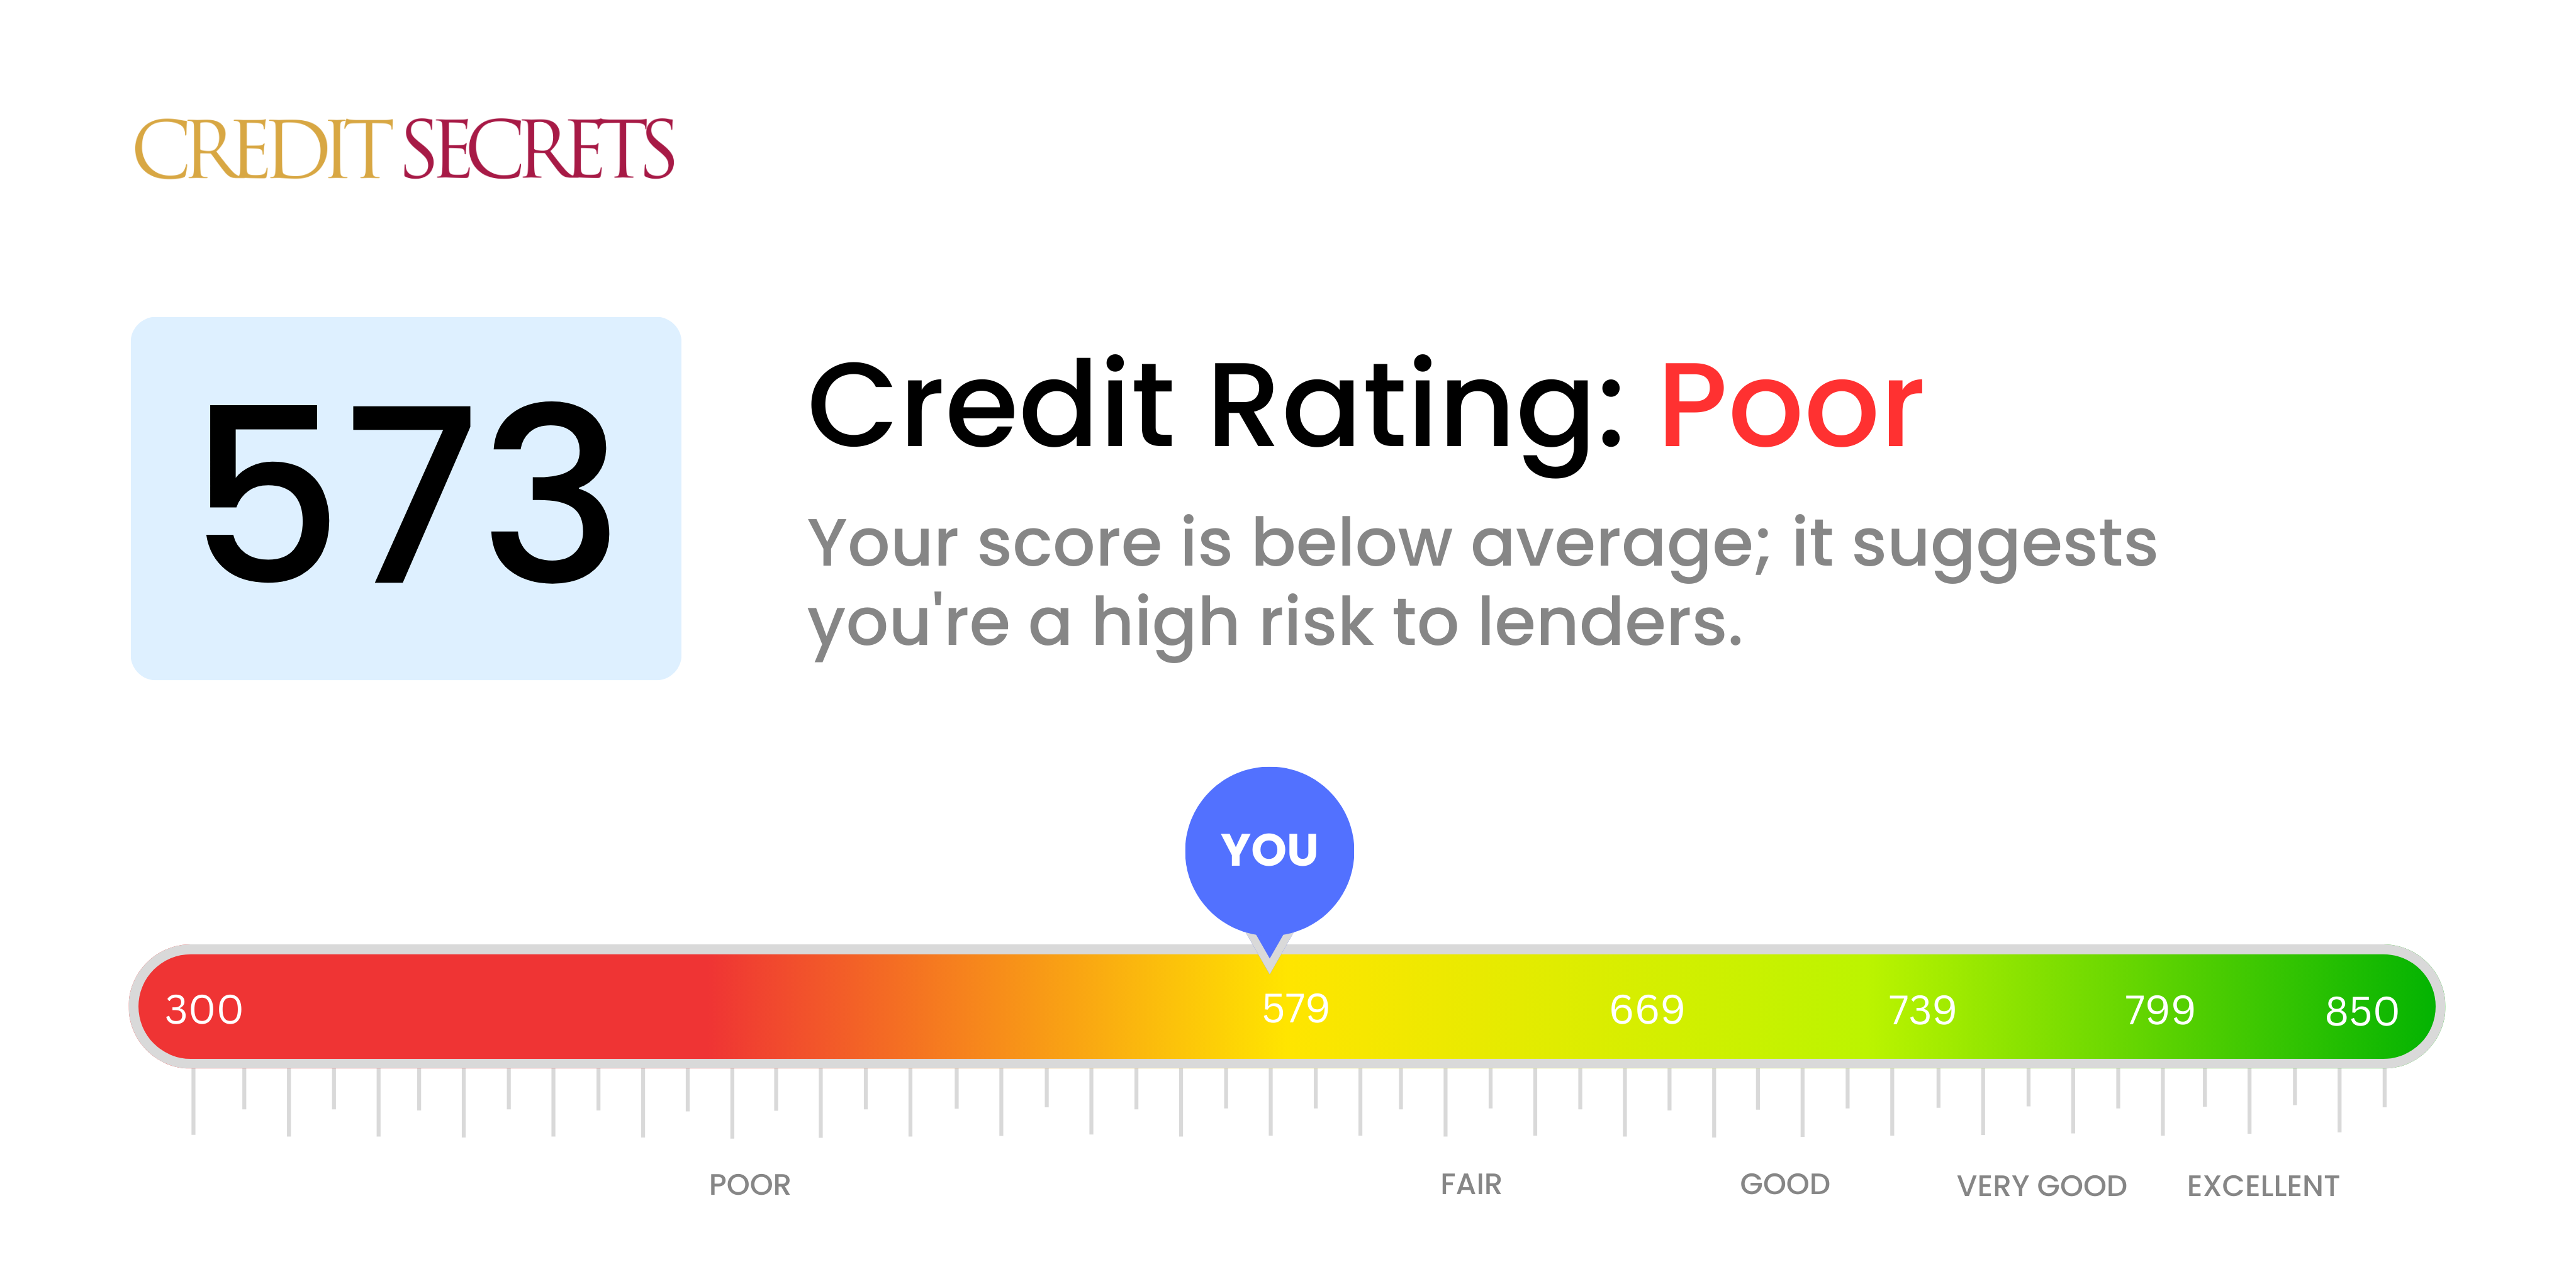 Is 573 a good credit score?